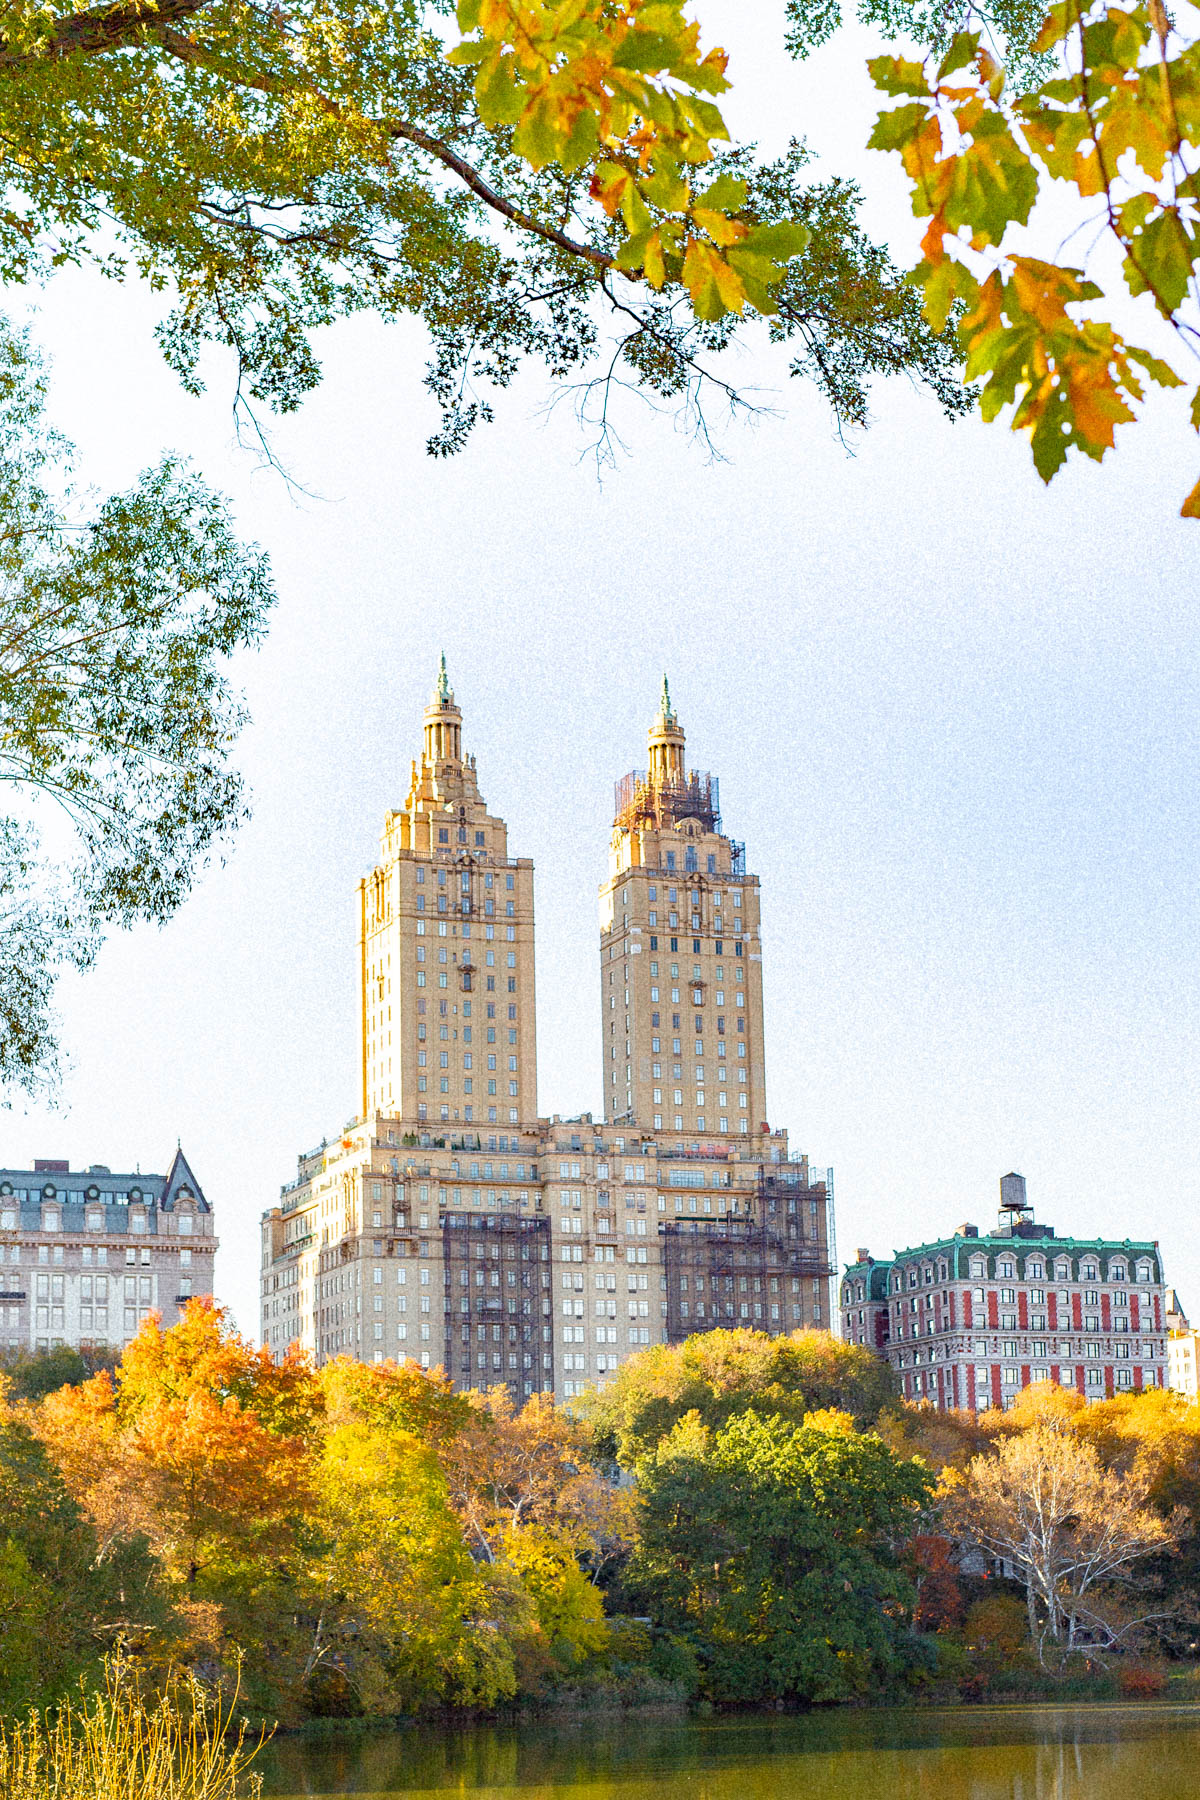 Visiting New York City in the Fall,
Fall colors in Central Park, NYC